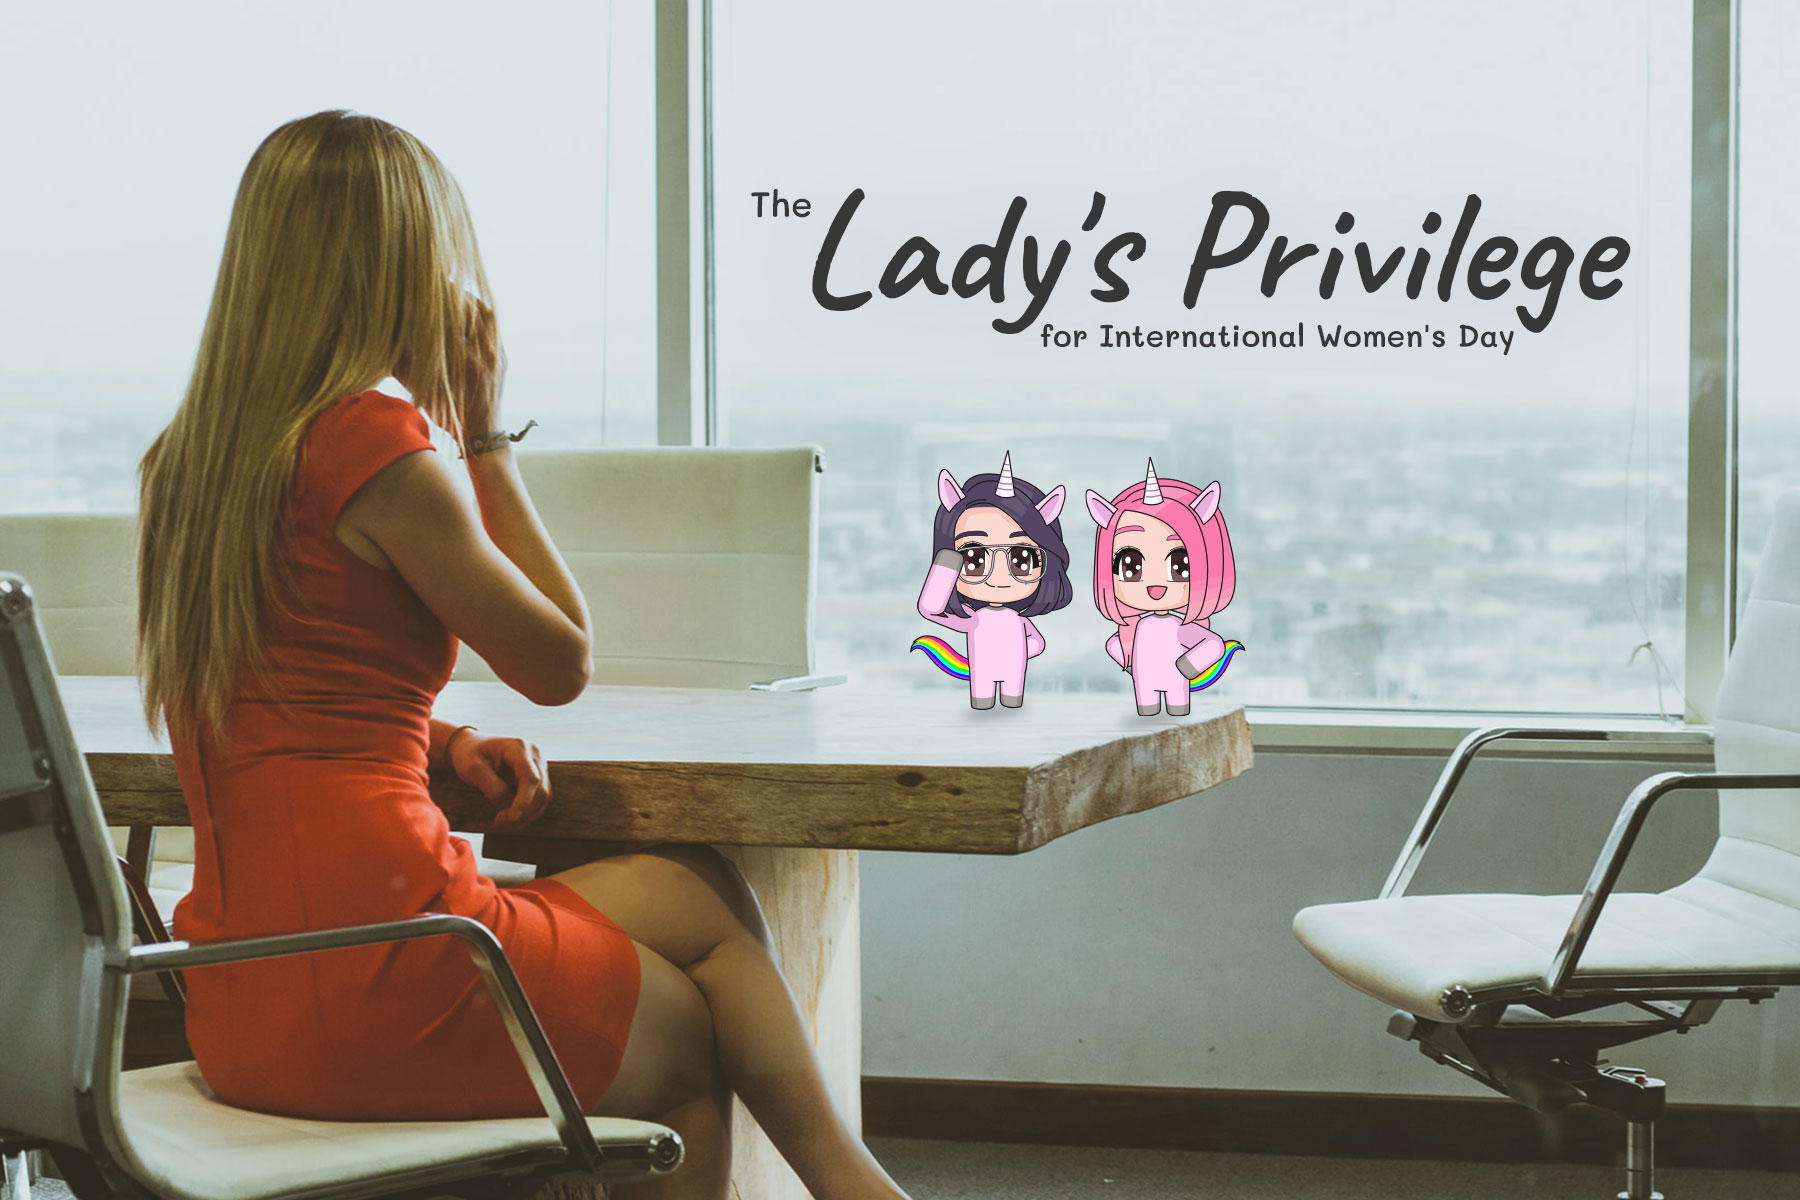 The lady’s privilege for International Women’s Day